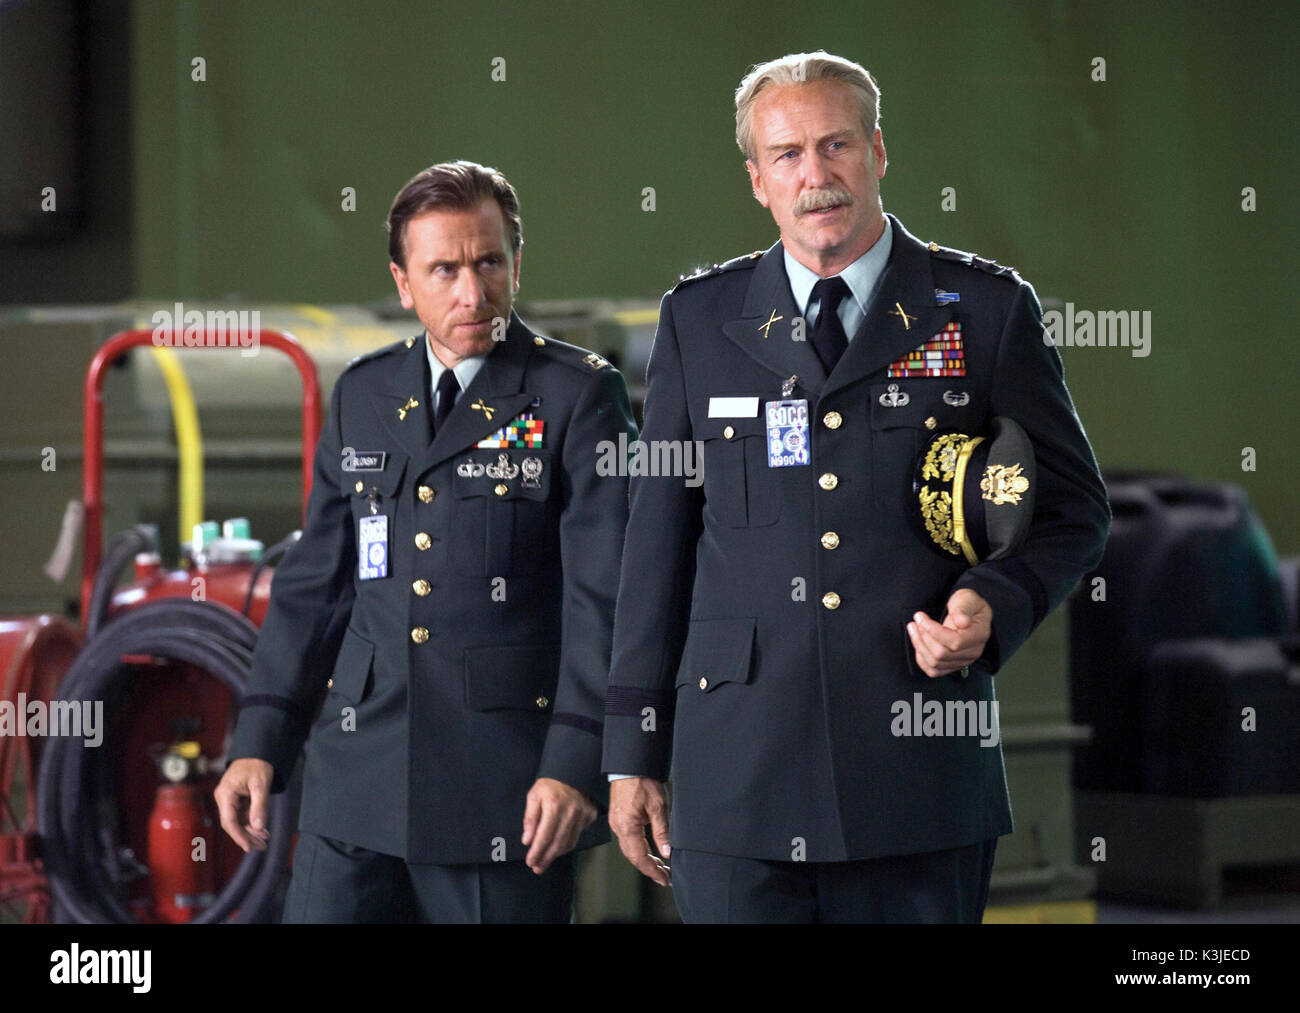 THE INCREDIBLE HULK aka HULK 2 TIM ROTH as Super soldier Emil Blonsky/ The Abomination , WILLIAM HURT is General Thunderbolt Ross THE INCREDIBLE HULK     Date: 2008 Stock Photo